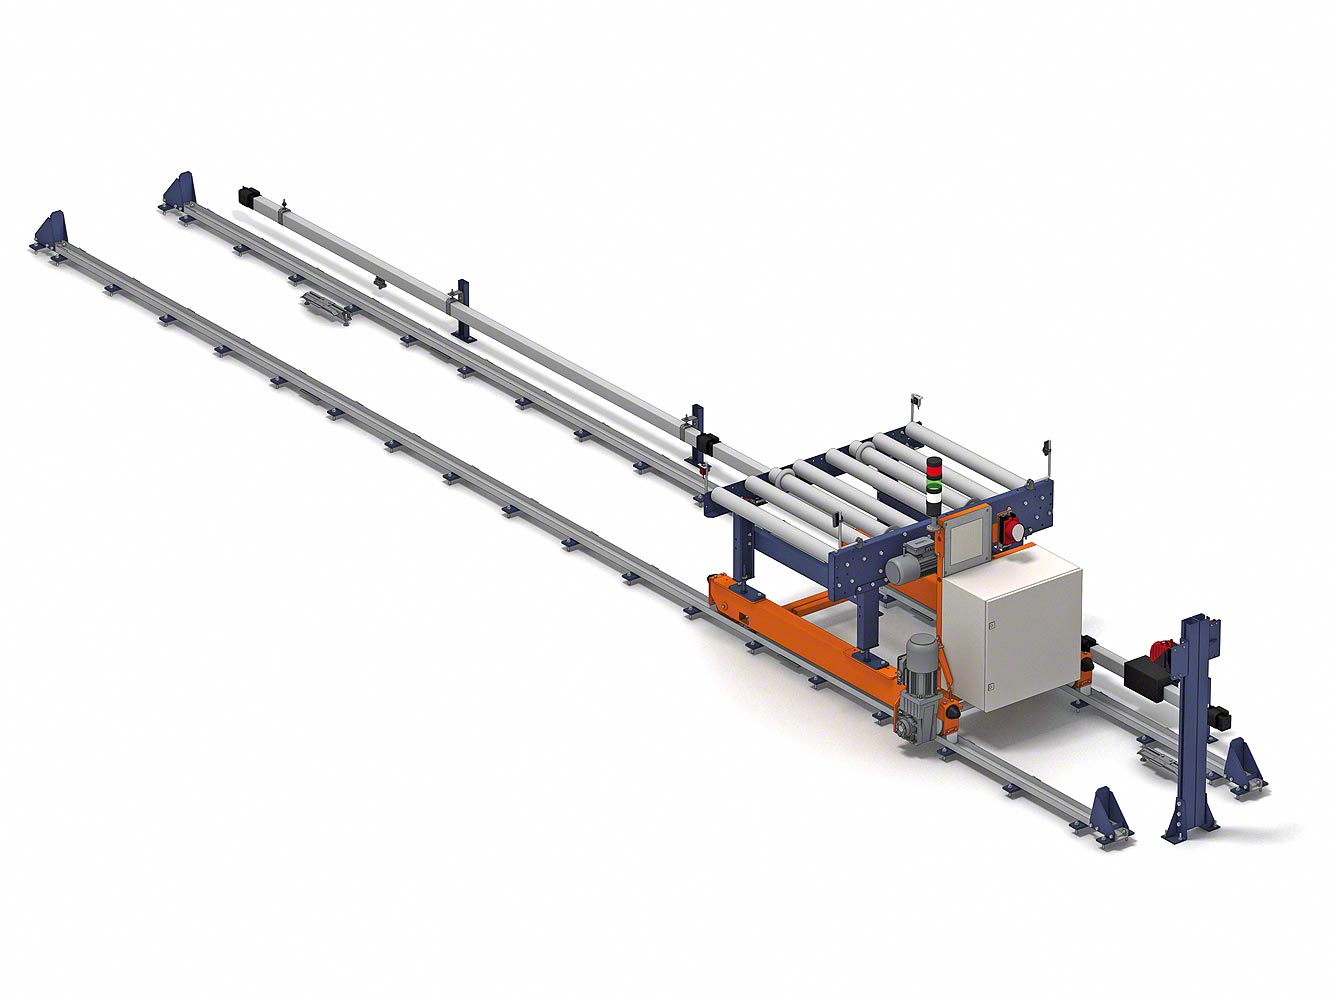 Conveyor system for pallets